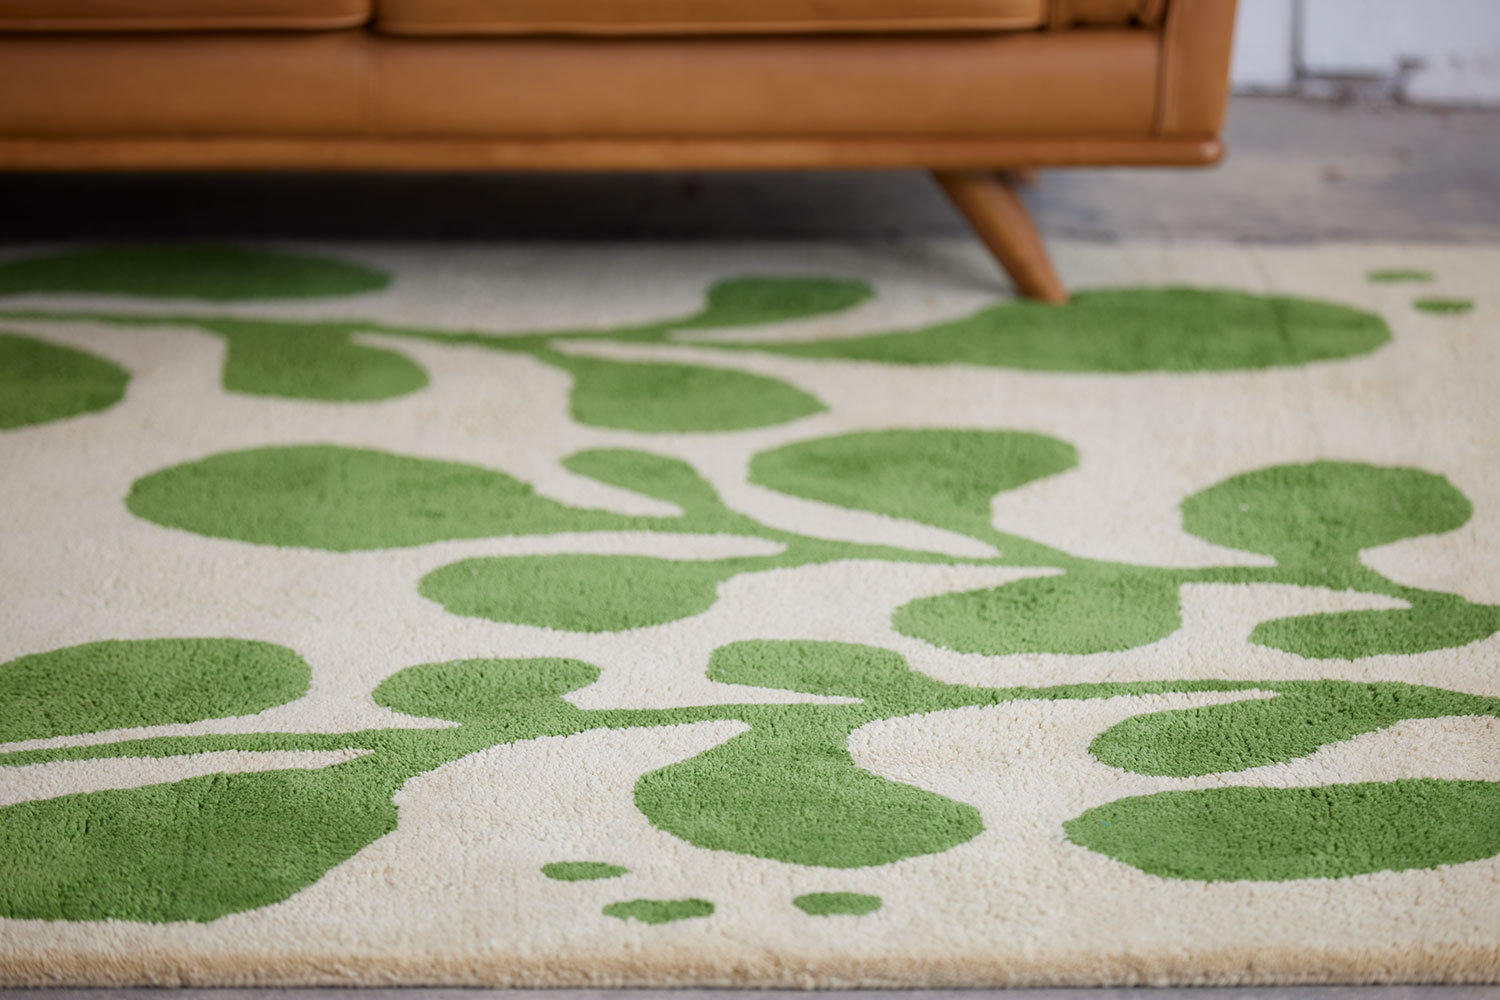 A brown leather chair sits on a neutral and green area rug with abstract designs on it called Vine Mambo